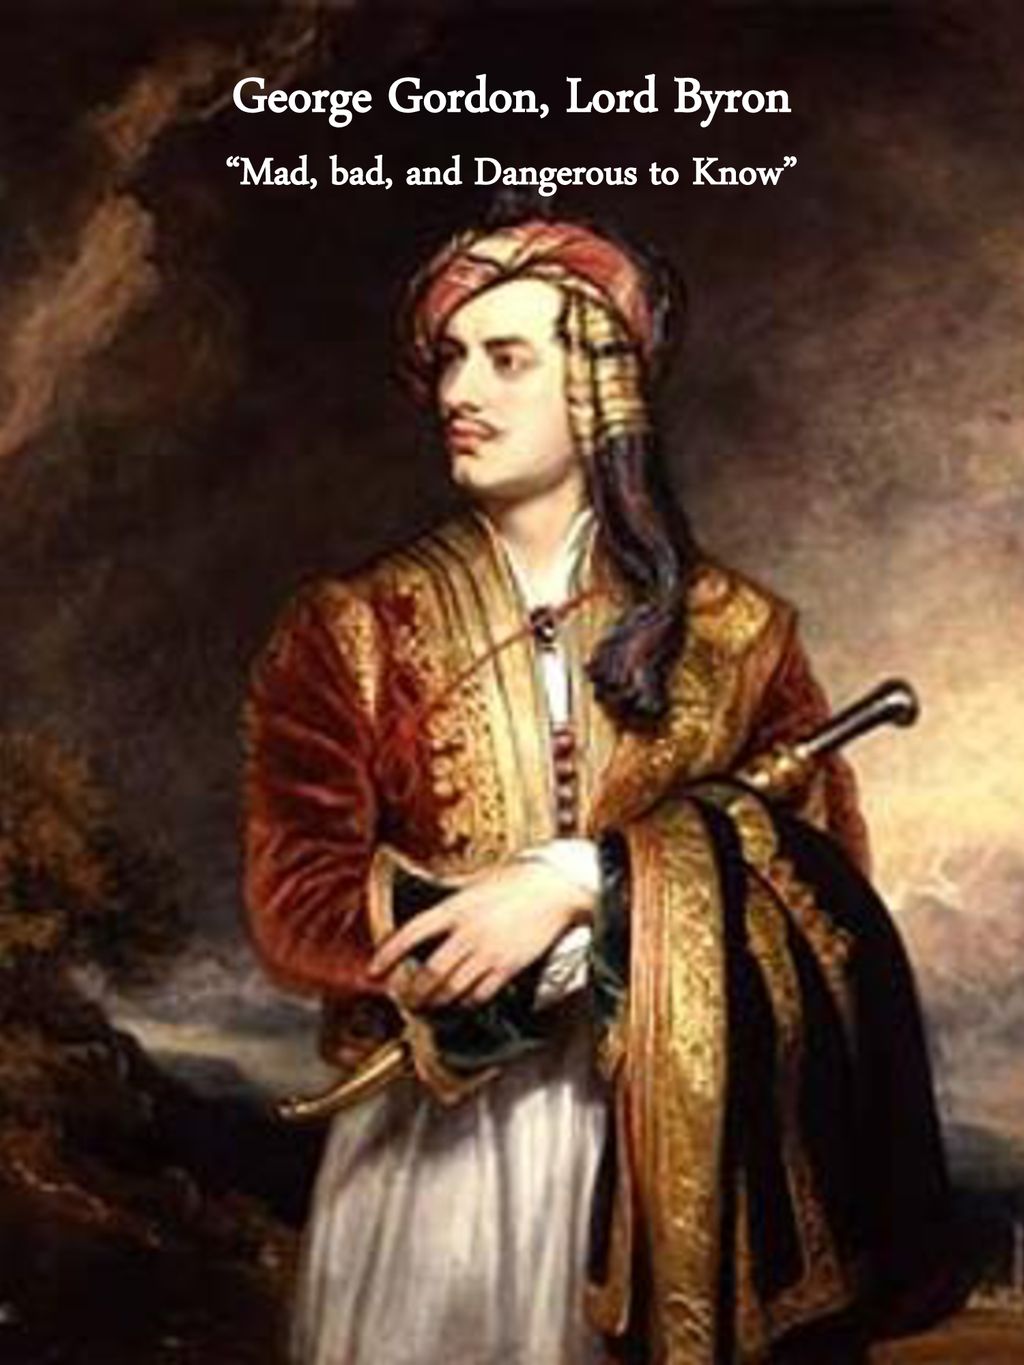 George Gordon, Lord Byron “Mad, bad, and Dangerous to Know” - ppt download